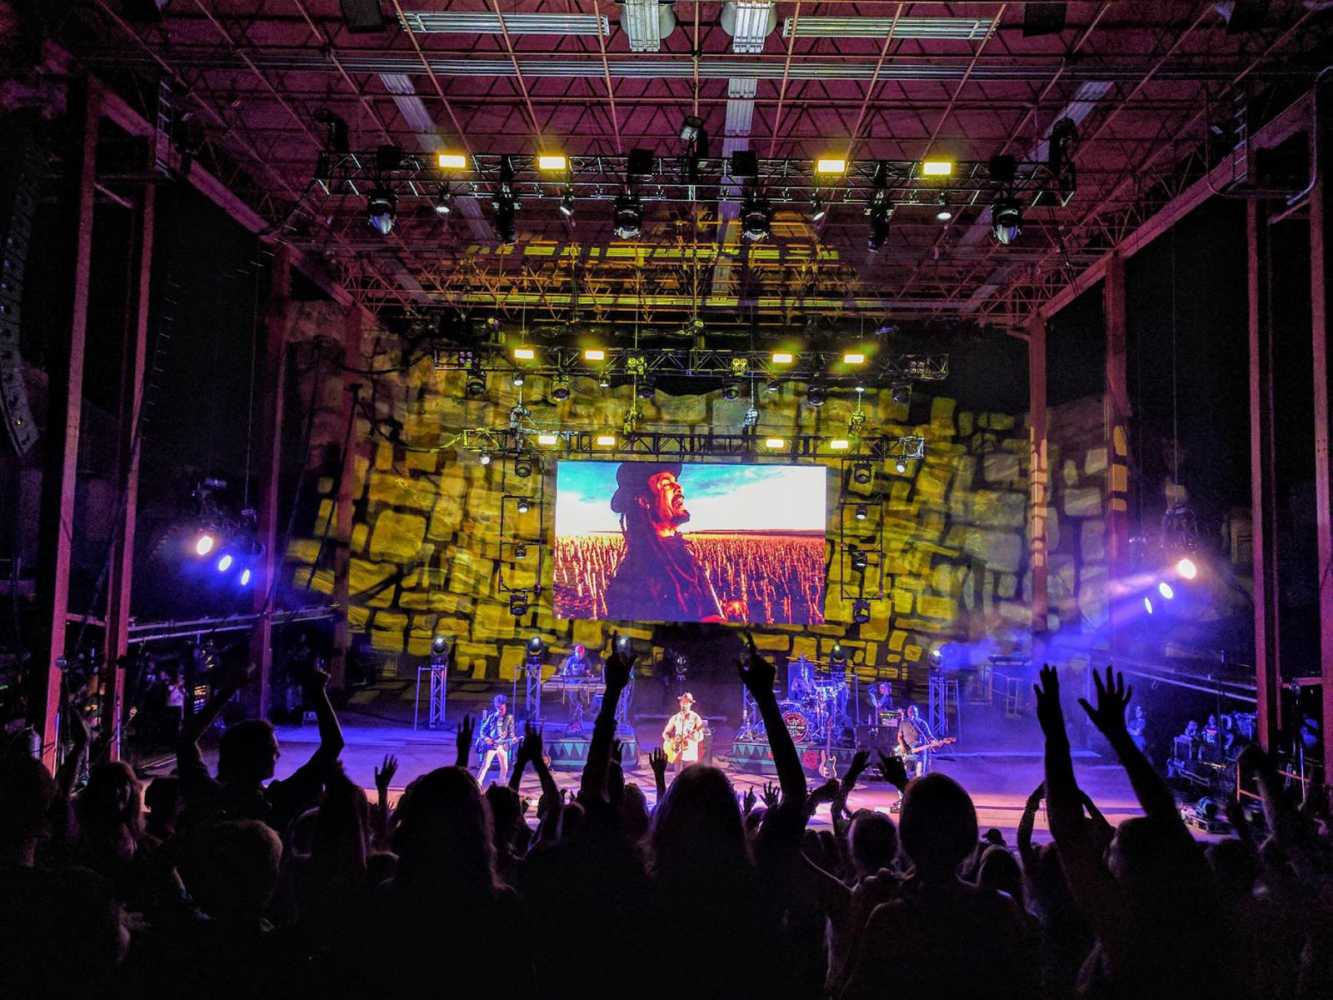 Franti’s show took the audience through a weaving musical journey